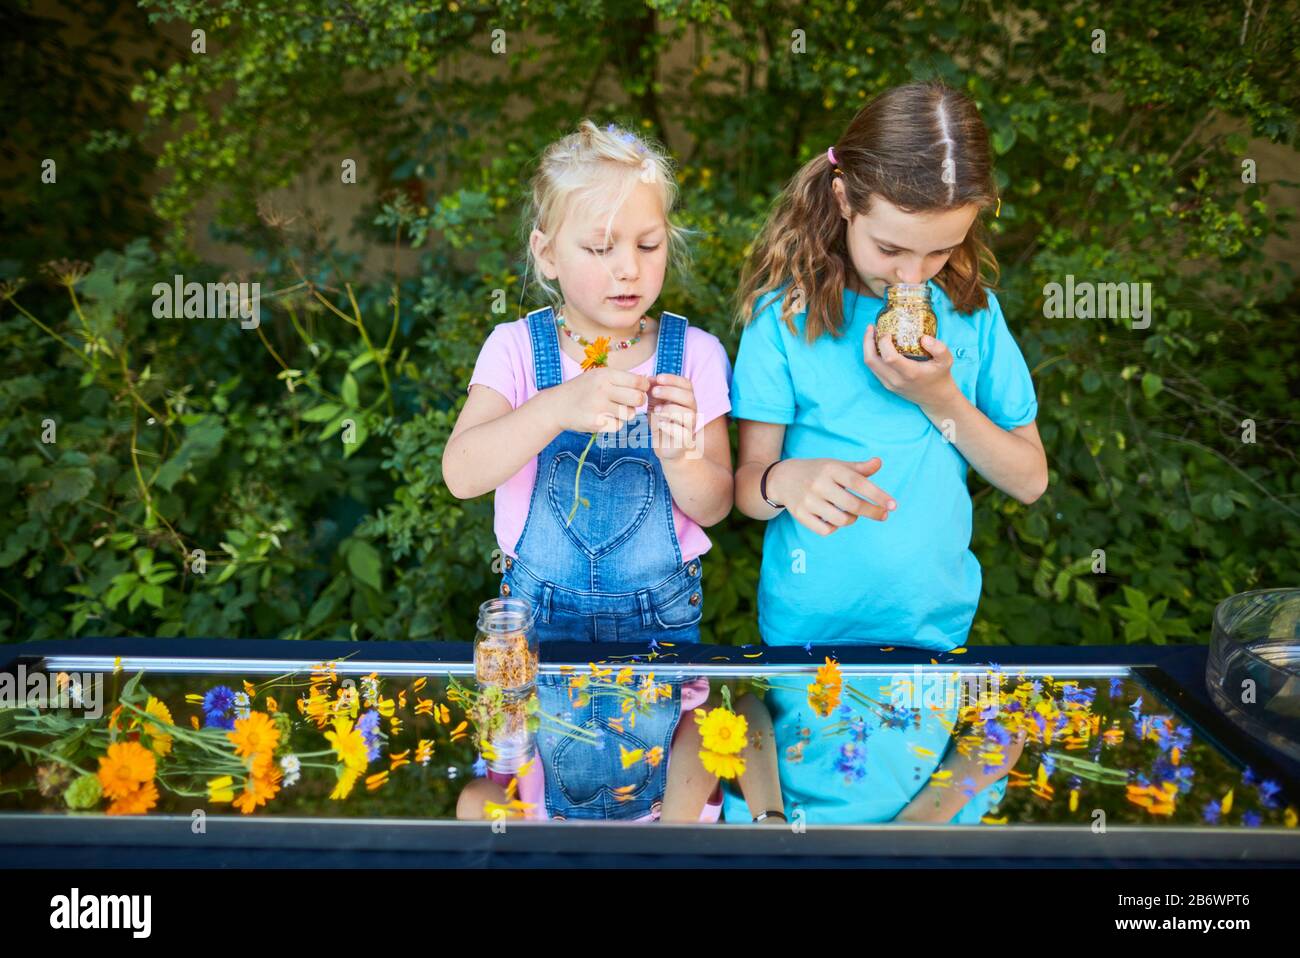 Children investigating food. Series: Preparation of flower sugar. Drying suitable flowers. Learning according to the Reggio Pedagogy principle, playful understanding and discovery. Germany. Stock Photo